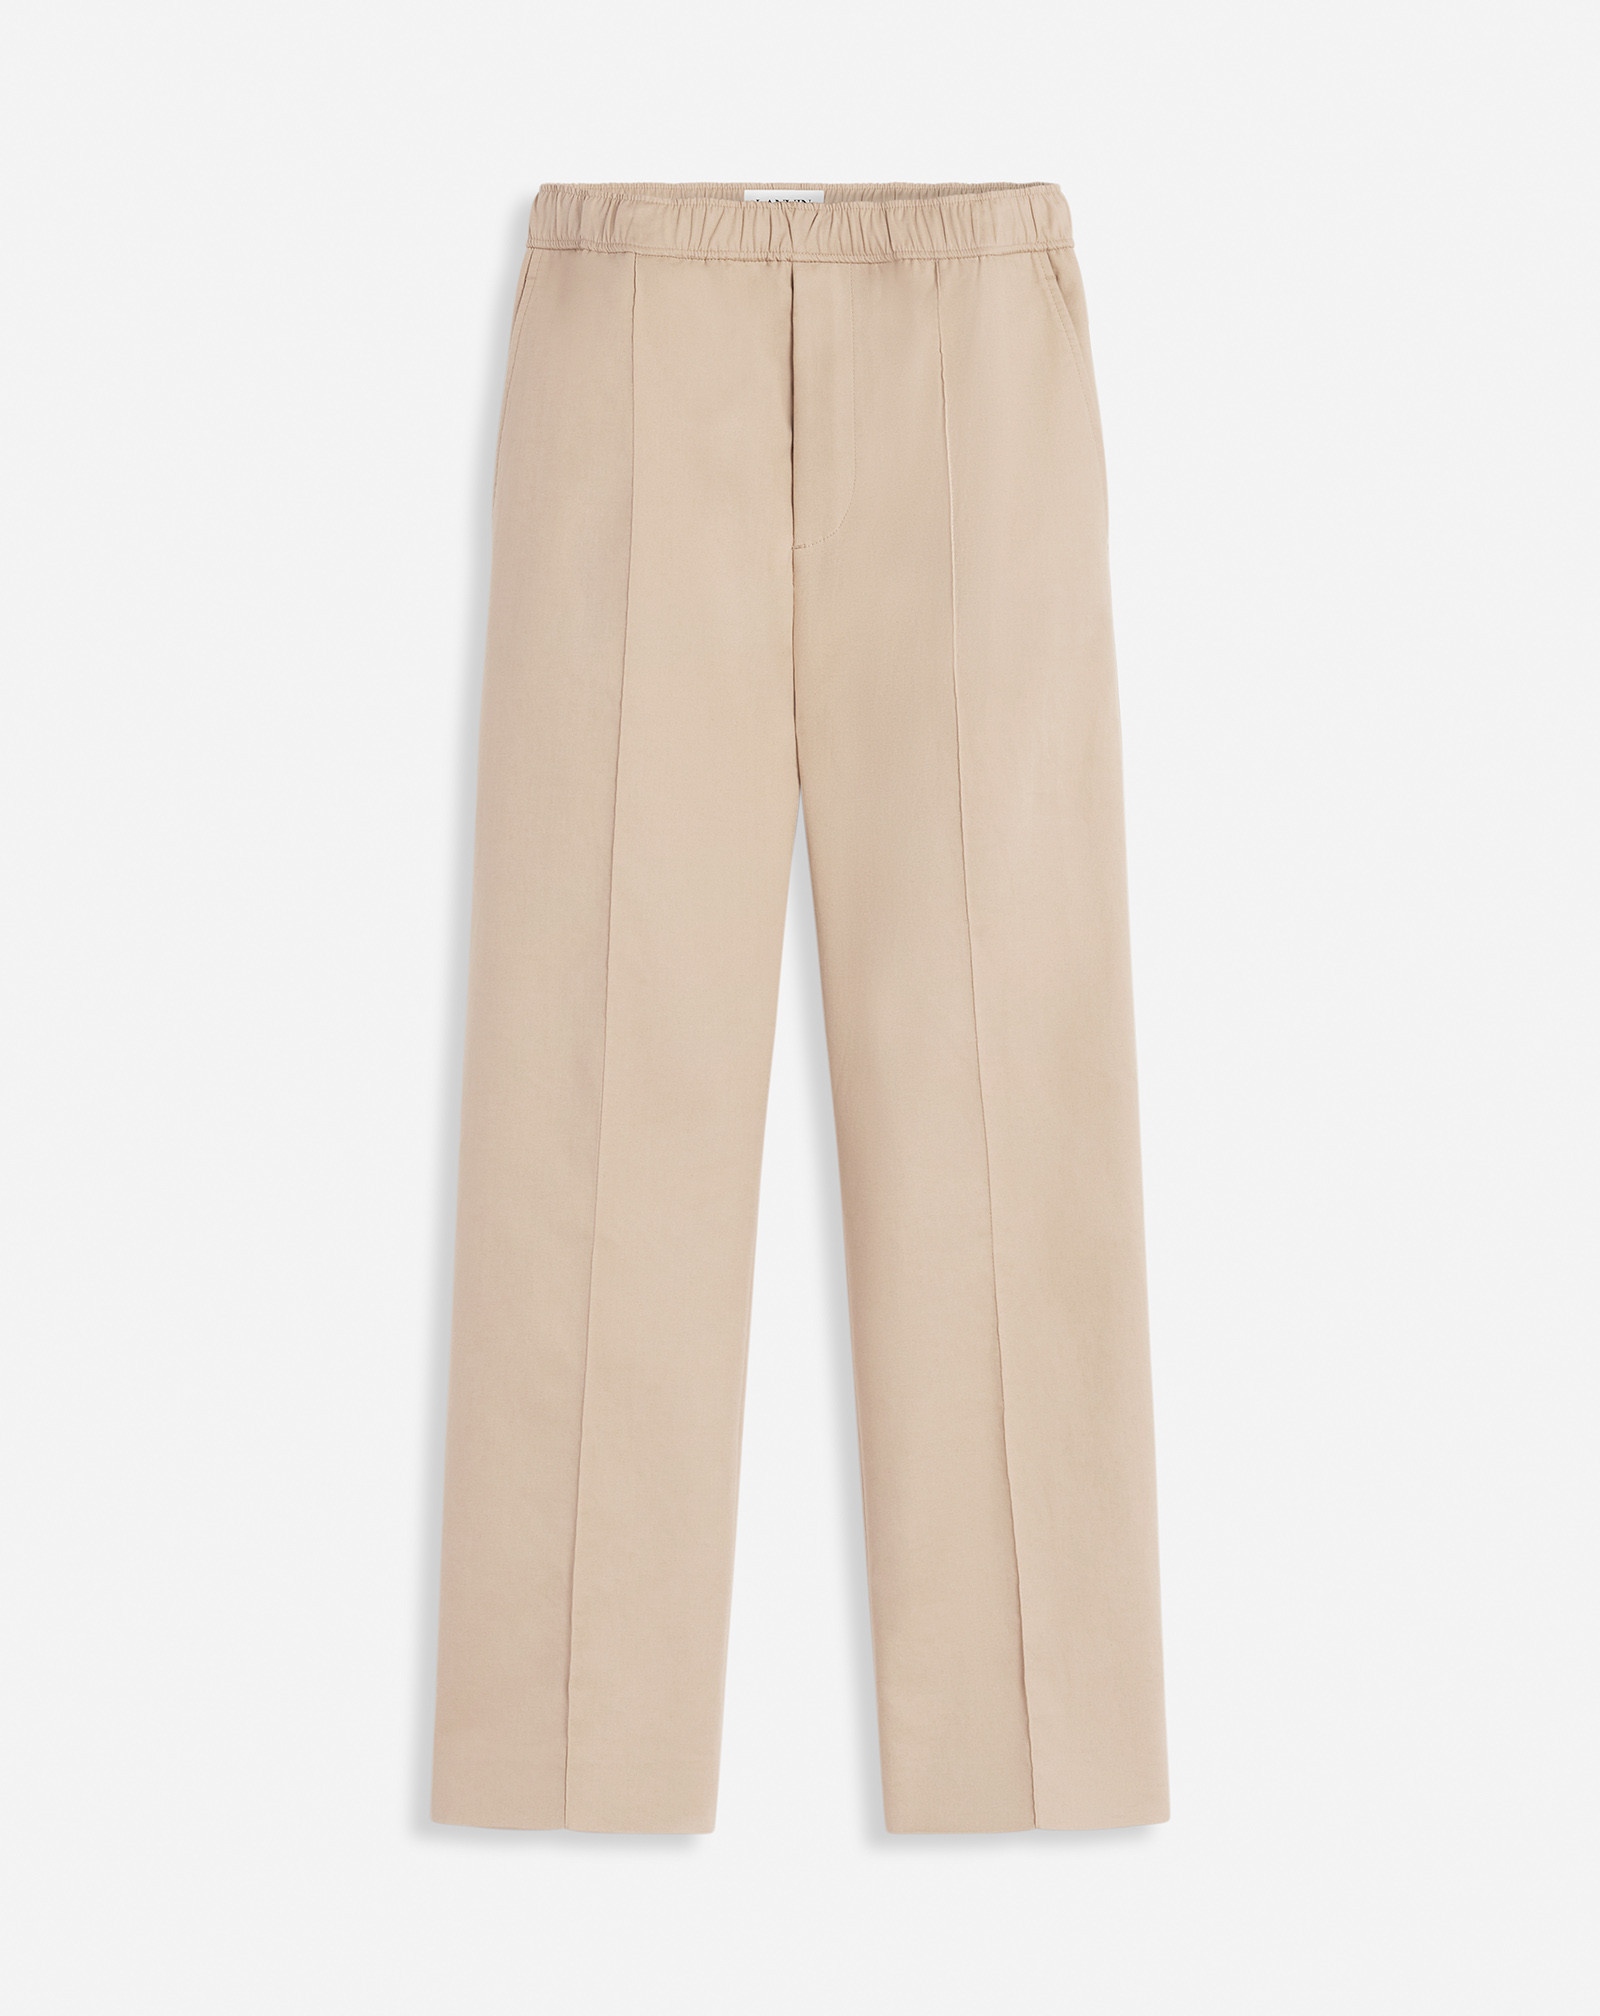 Suit Pants With An Elasticated Waistband | Lanvin